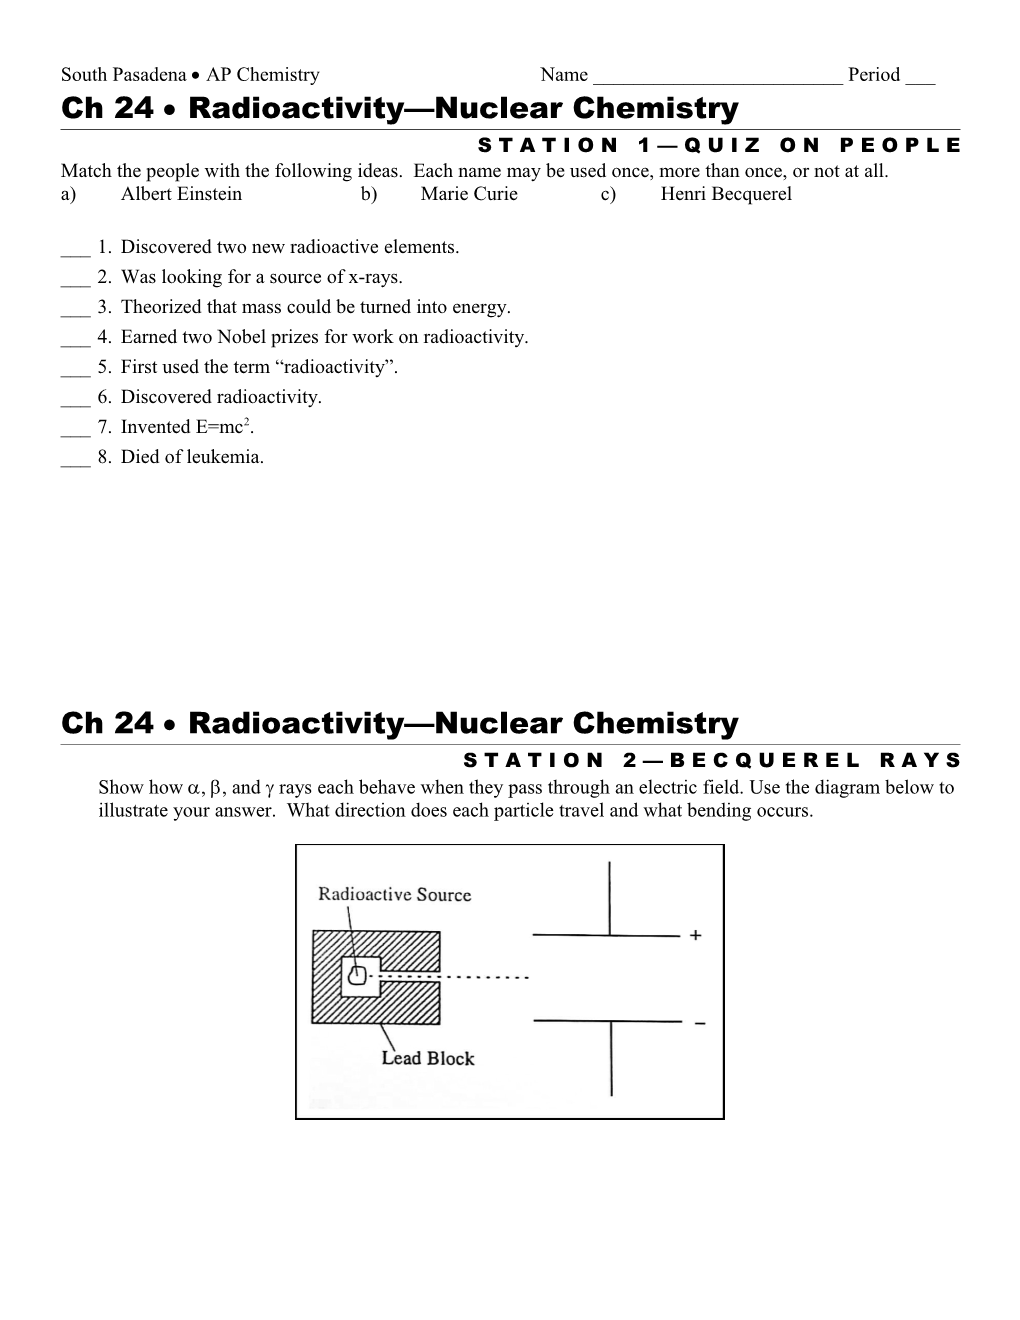 Unit 6 Radioactivity What Is the Nucleus Like